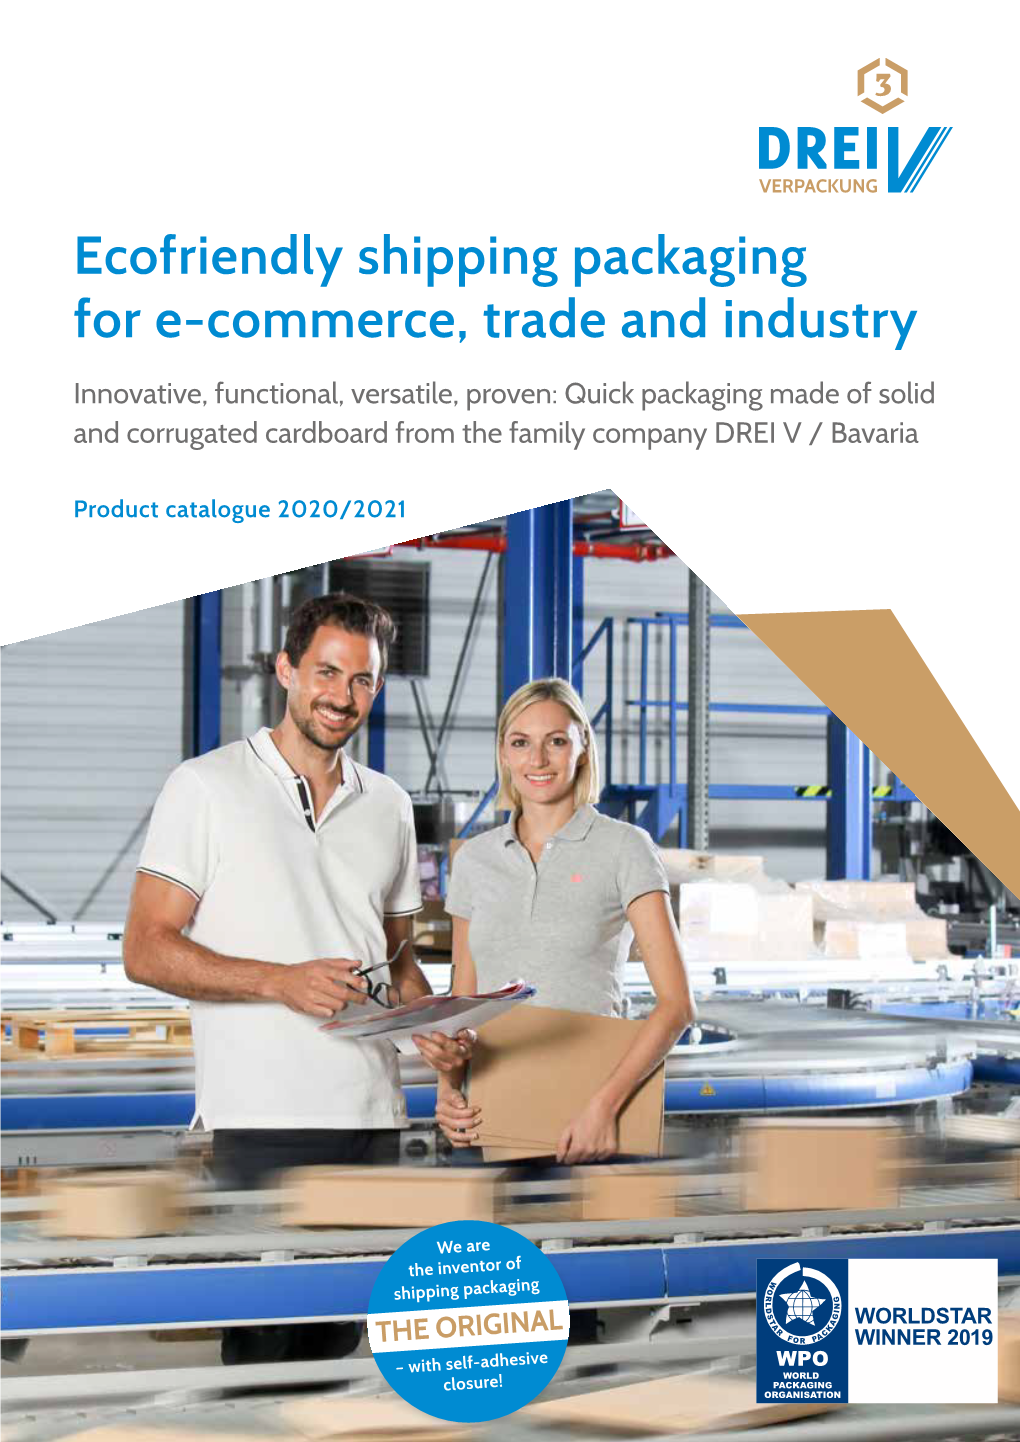 Ecofriendly Shipping Packaging for E-Commerce, Trade and Industry